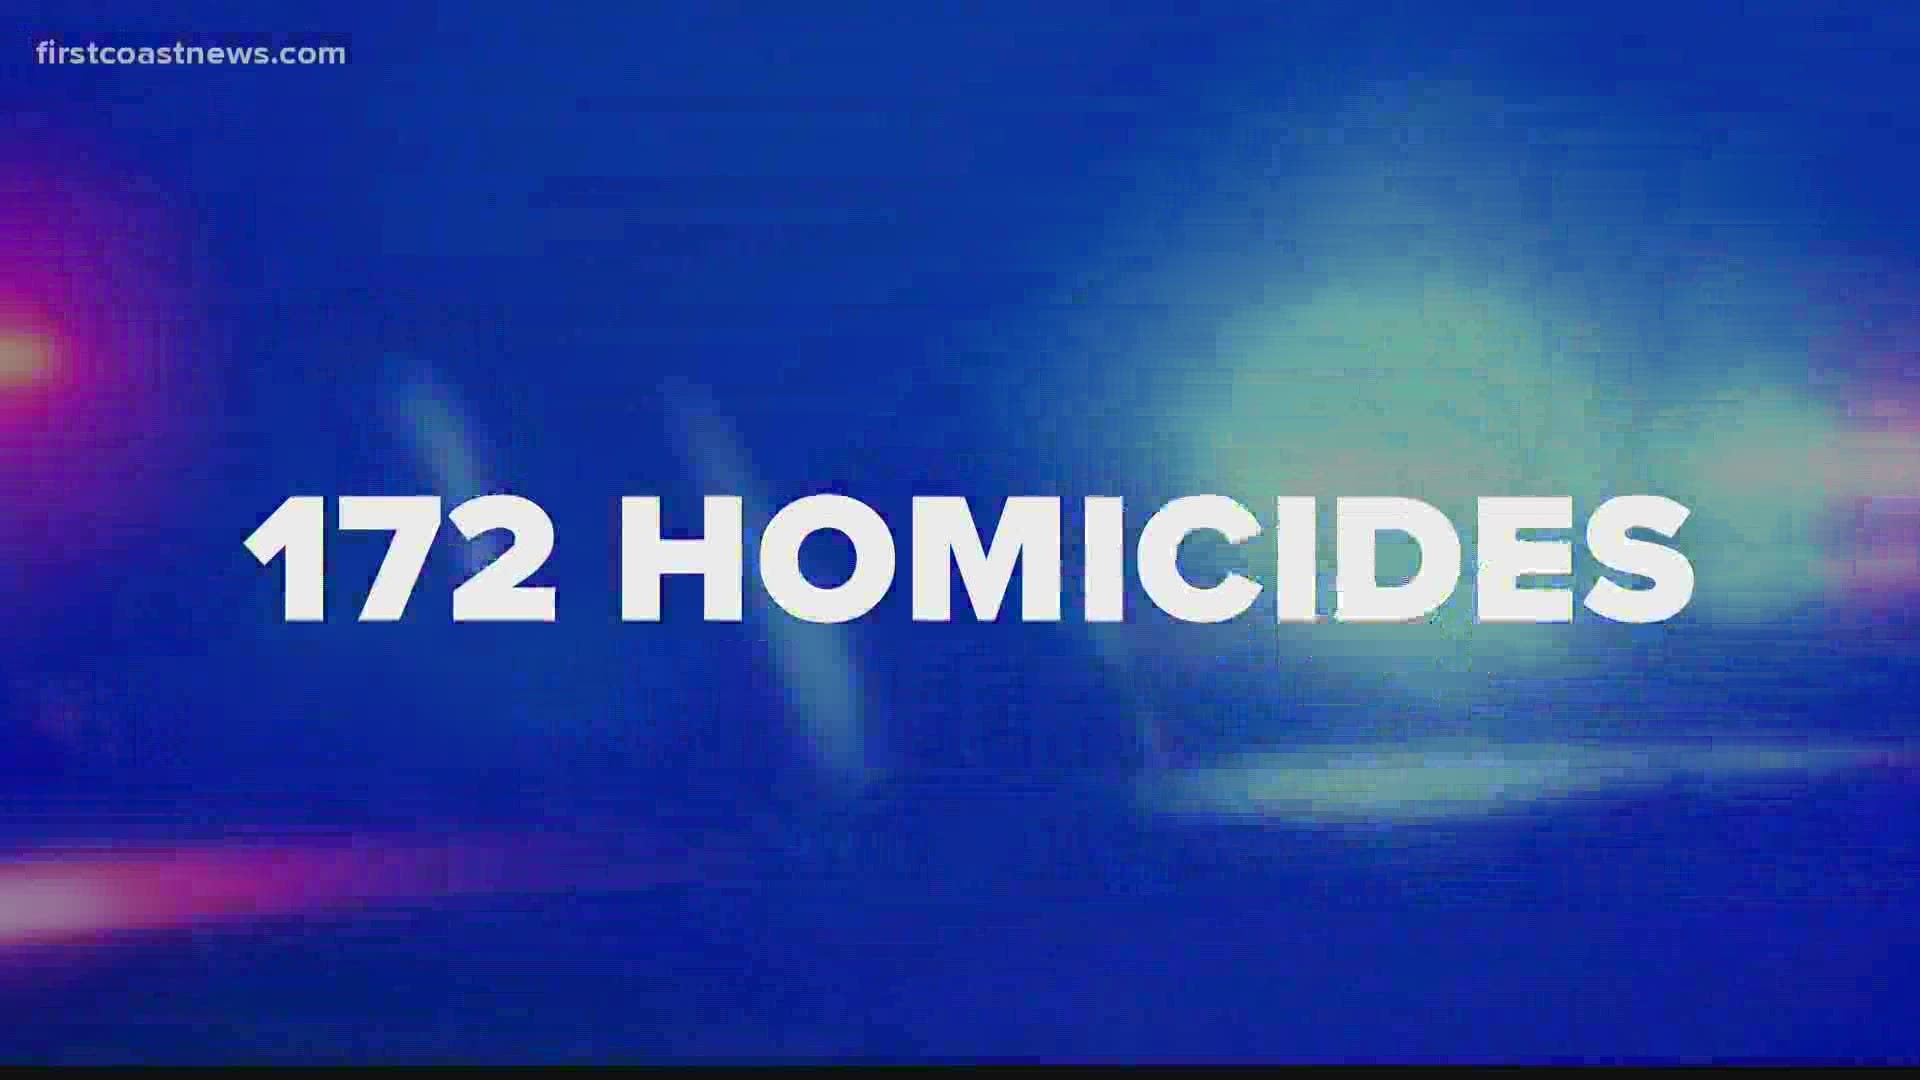 A crime expert says the solve rate for homicides has dropped to below 50%. COVID-19 and investigators leaving the department are only part of the problem.